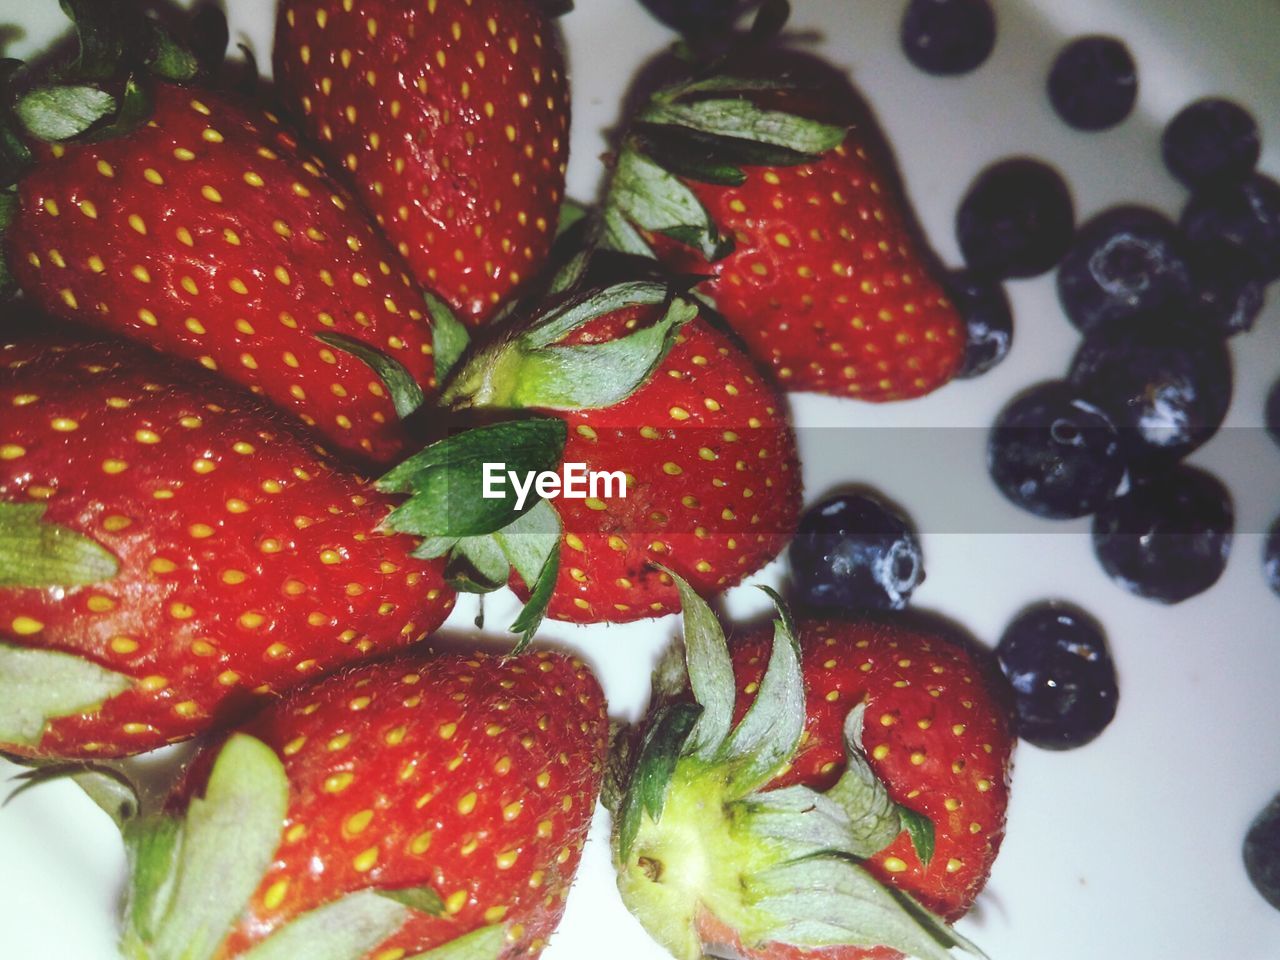 HIGH ANGLE VIEW OF STRAWBERRIES ON PLATE